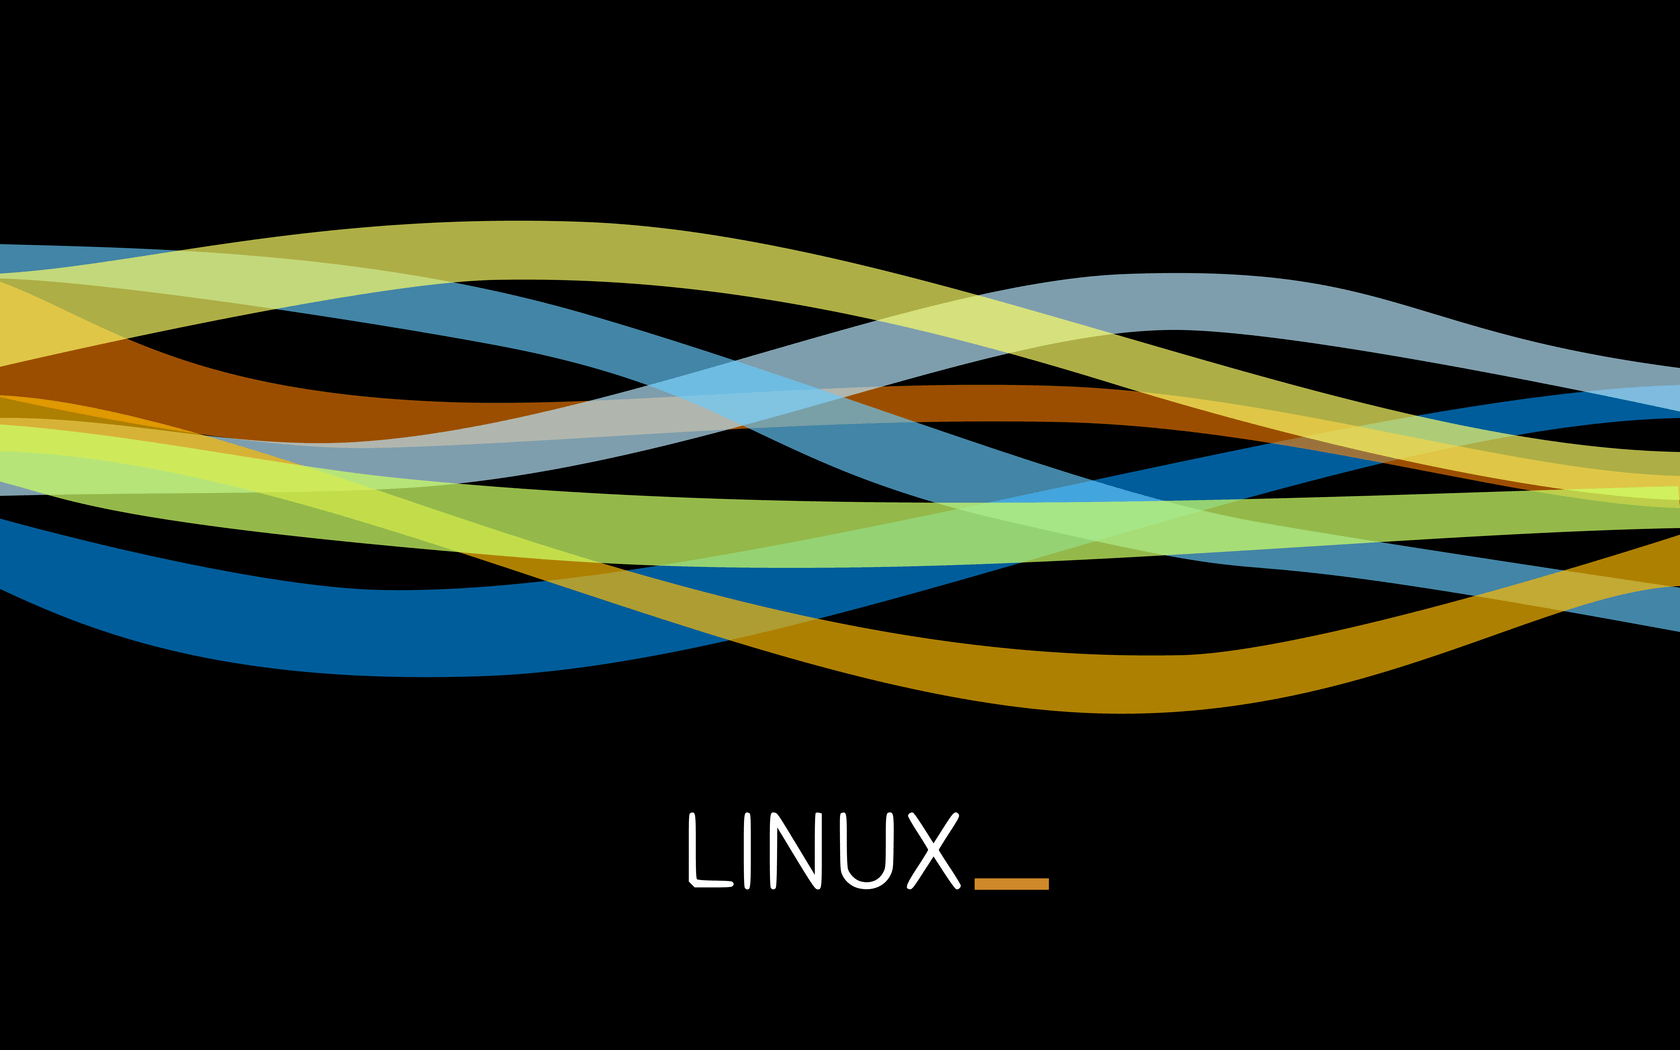 Linux Wallpaper. Backdrops for Your Life